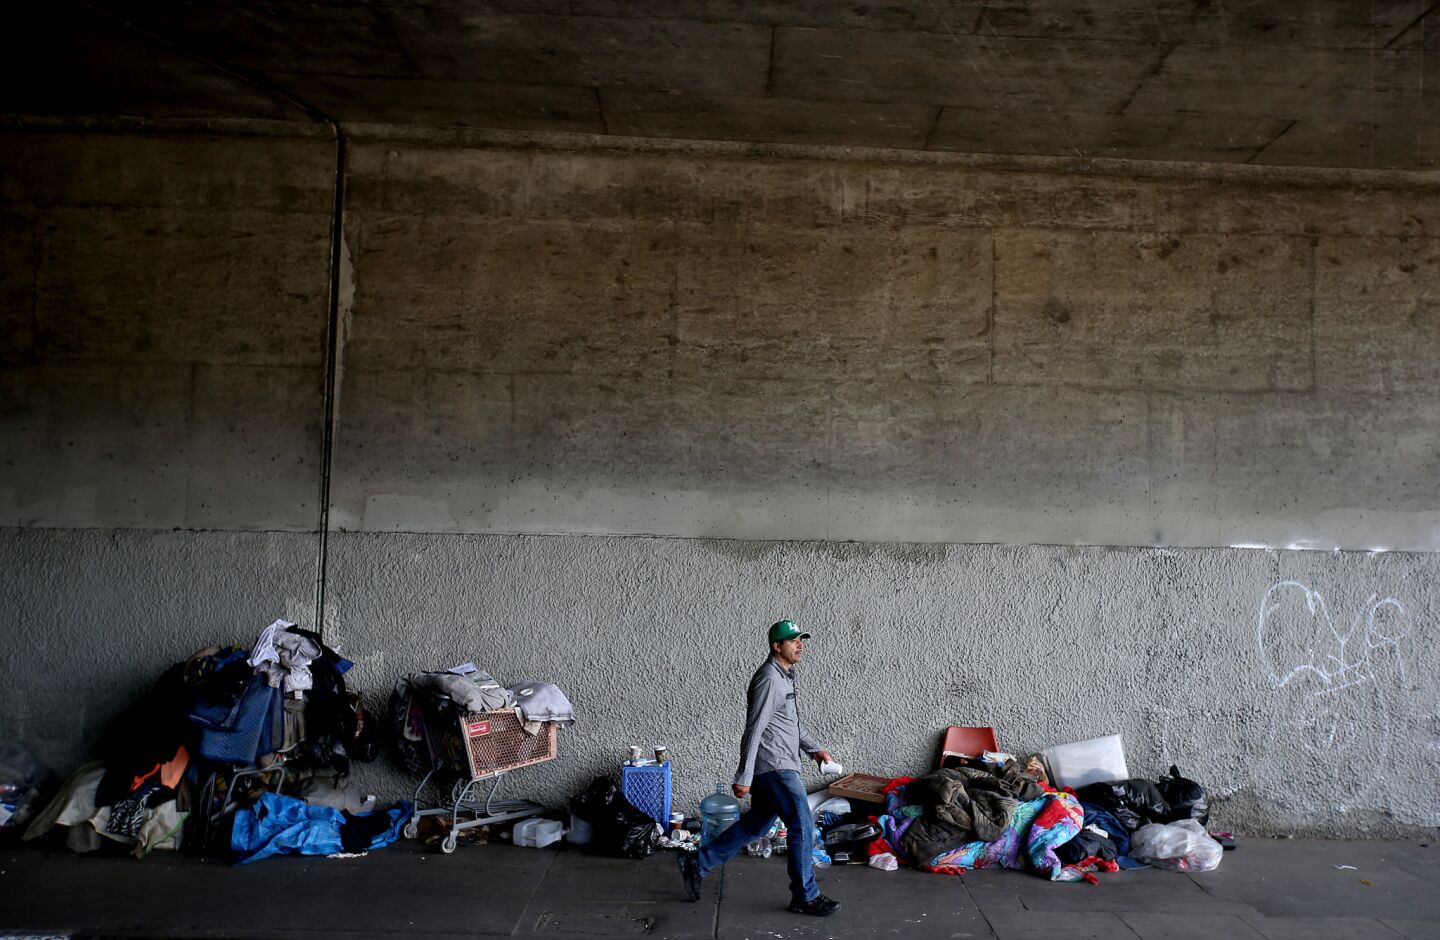 A man walks past a homeless encampment along 9th Street where it cuts under the 110 Freeway in downtown Los Angeles.